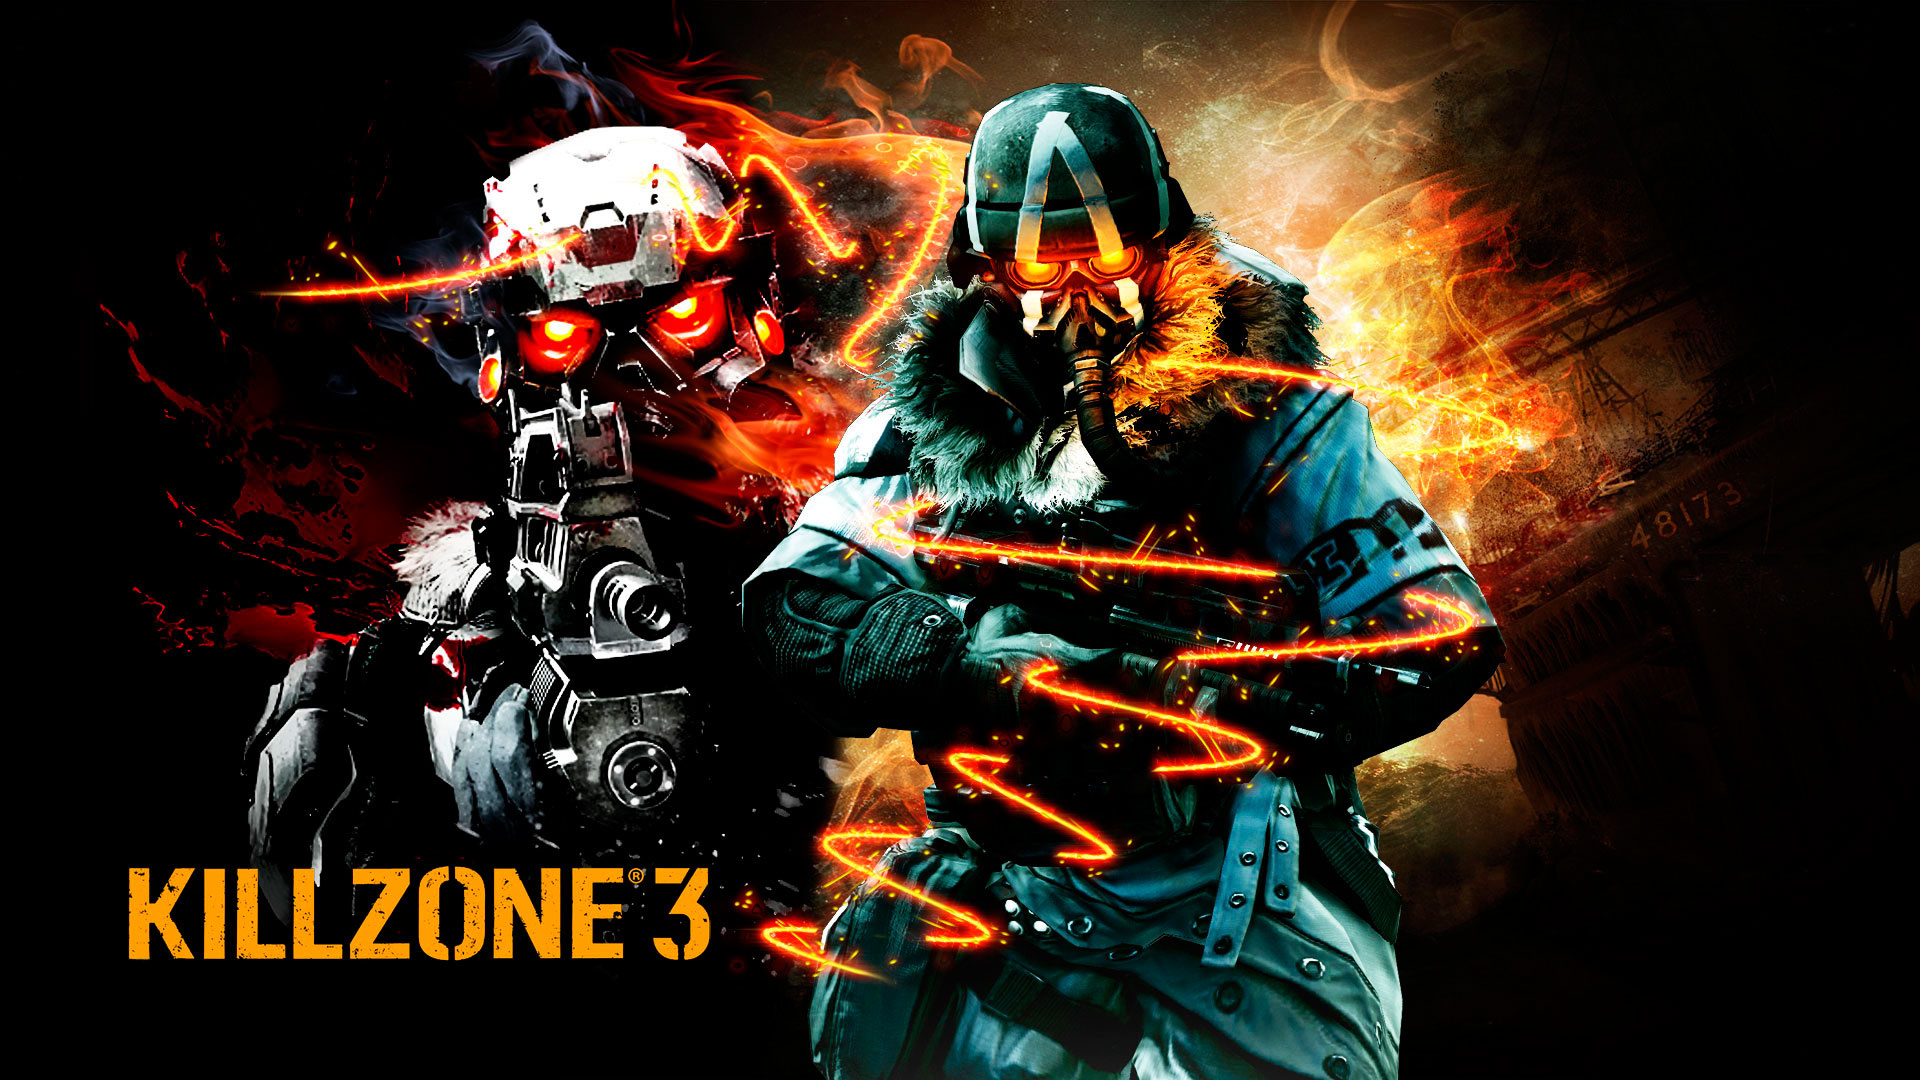 Killzone 3, High definition wallpaper, Captivating imagery, Action-packed gameplay, 1920x1080 Full HD Desktop